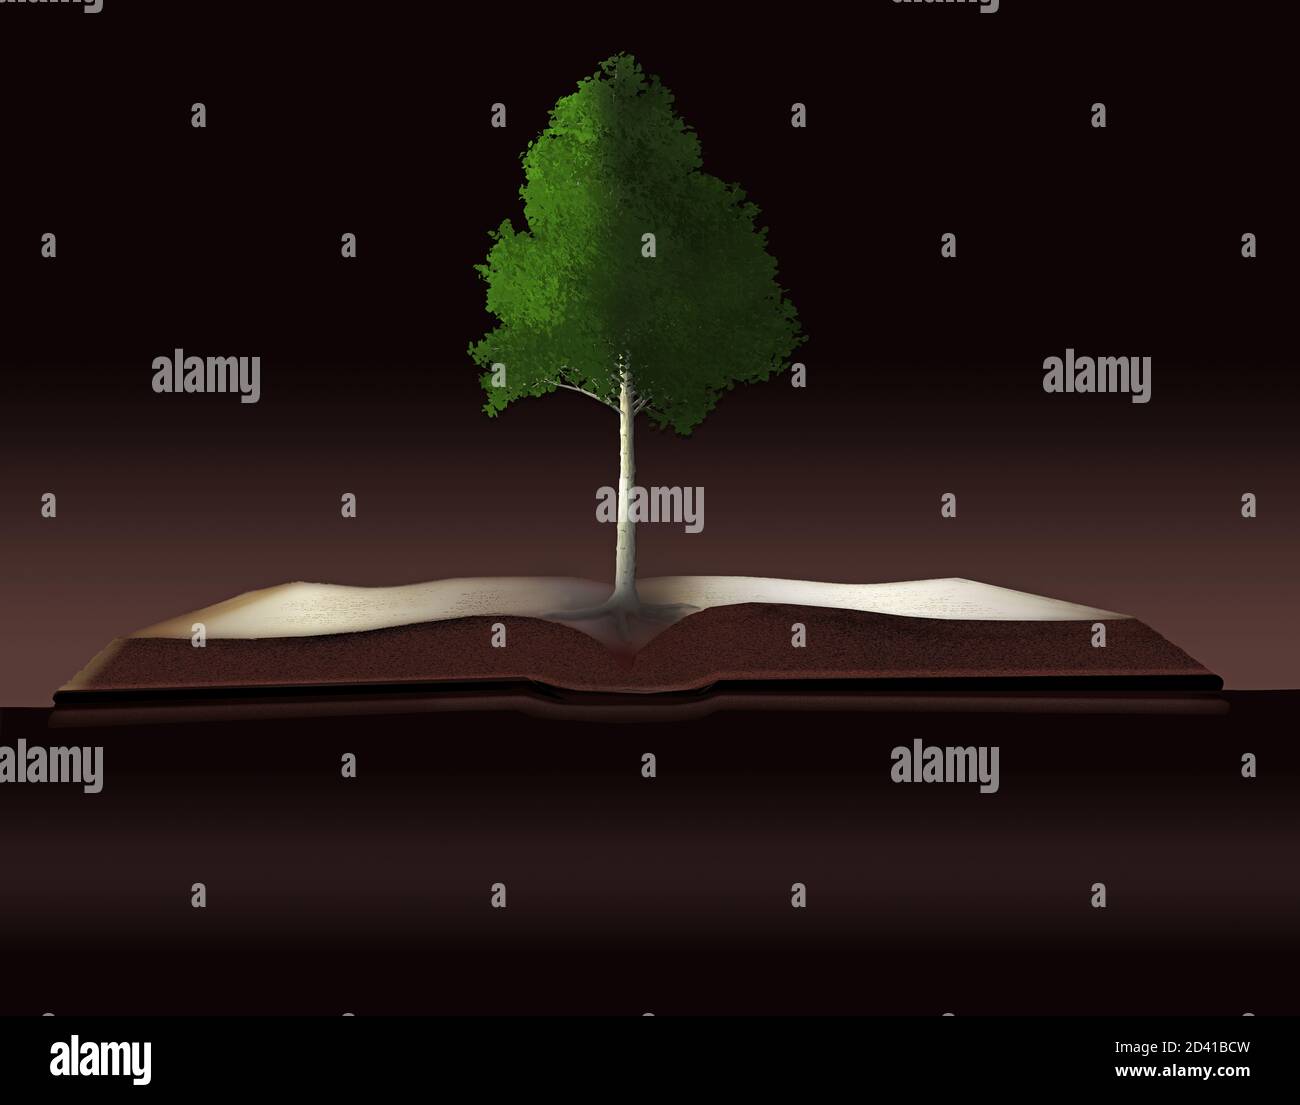 Dendrology, the study of trees is illustrated with a tree growing out of a book. Also illustrates the tree of knowledge and sustainability of wood. Stock Photo